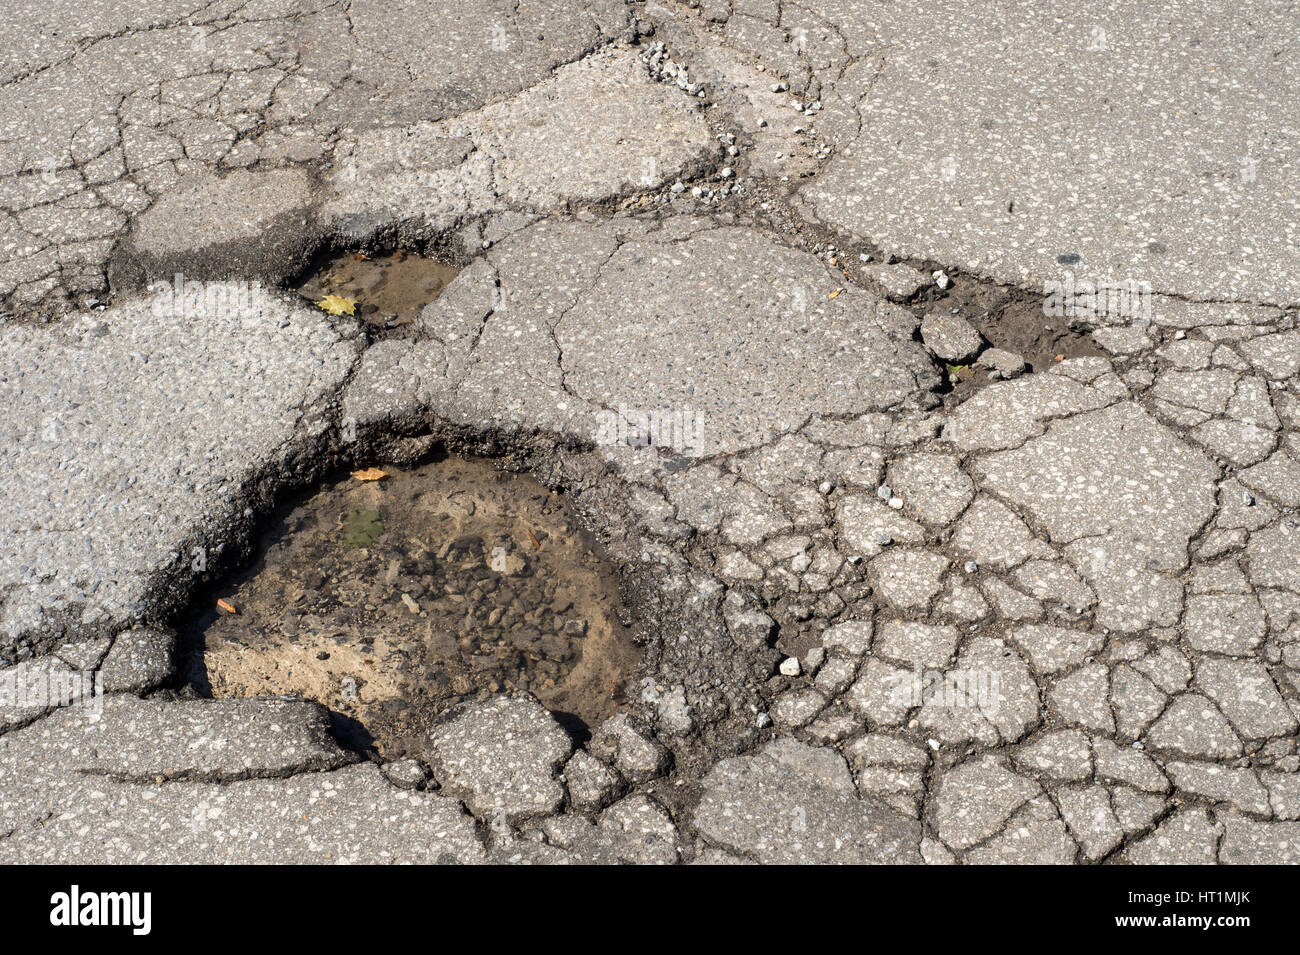 Large deep pothole in Montreal street, Canada. Stock Photo